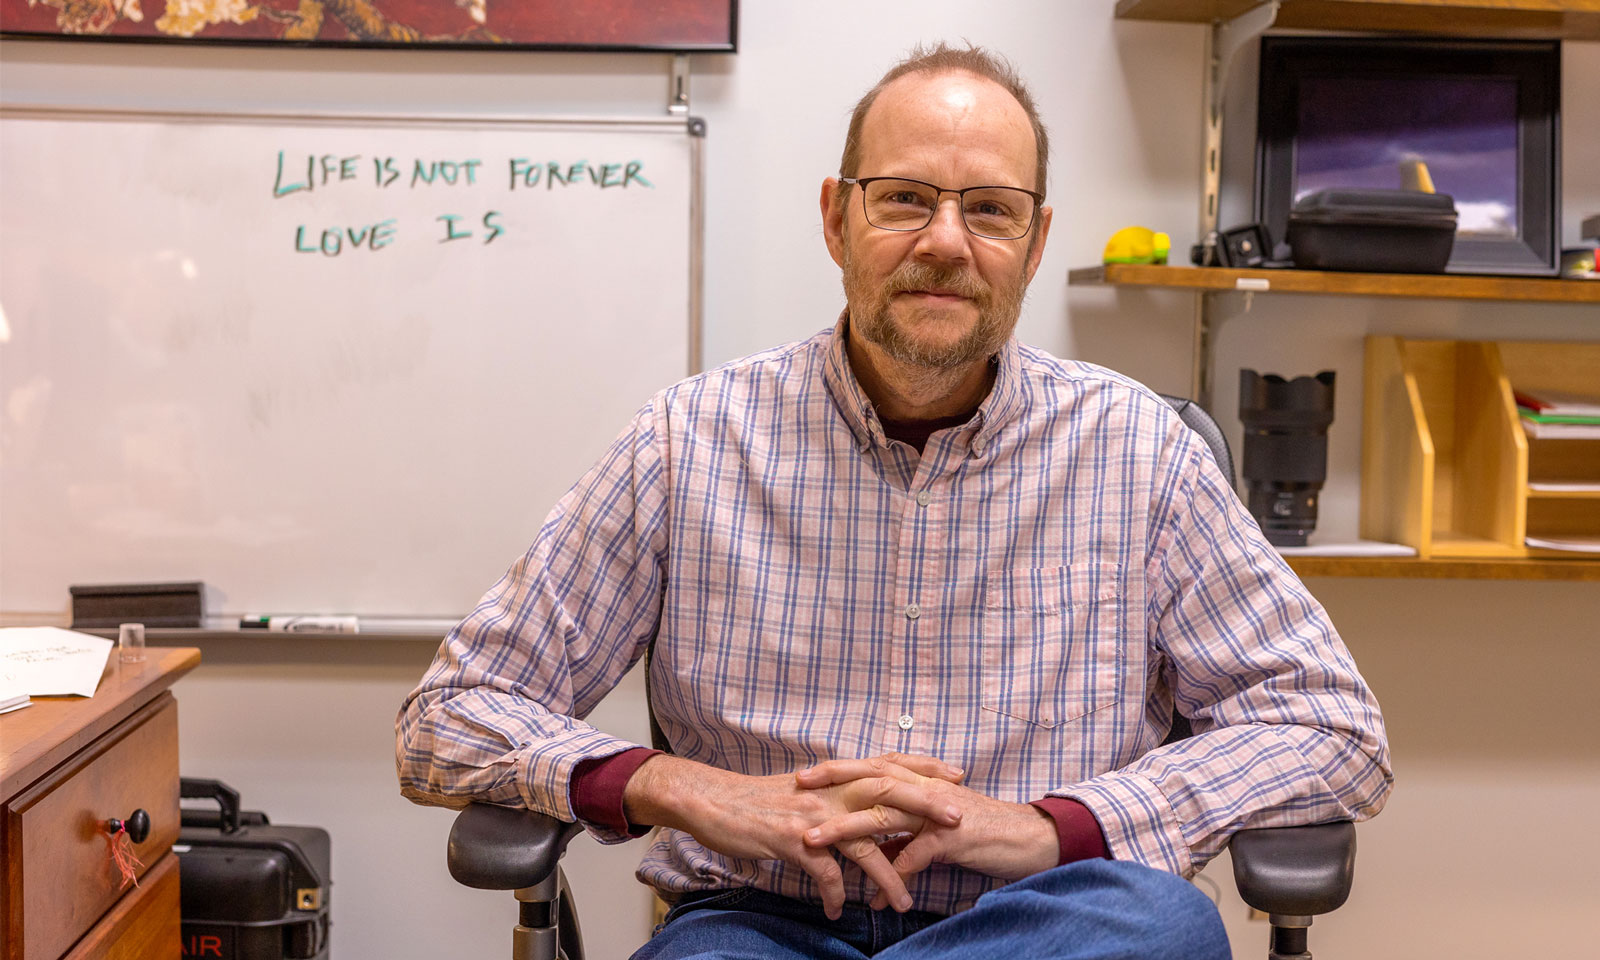 Inspiring students to pursue their passion for storytelling is rewarding to visiting assistant journalism professor Doug Swift, who arrived at Denison in 2017.